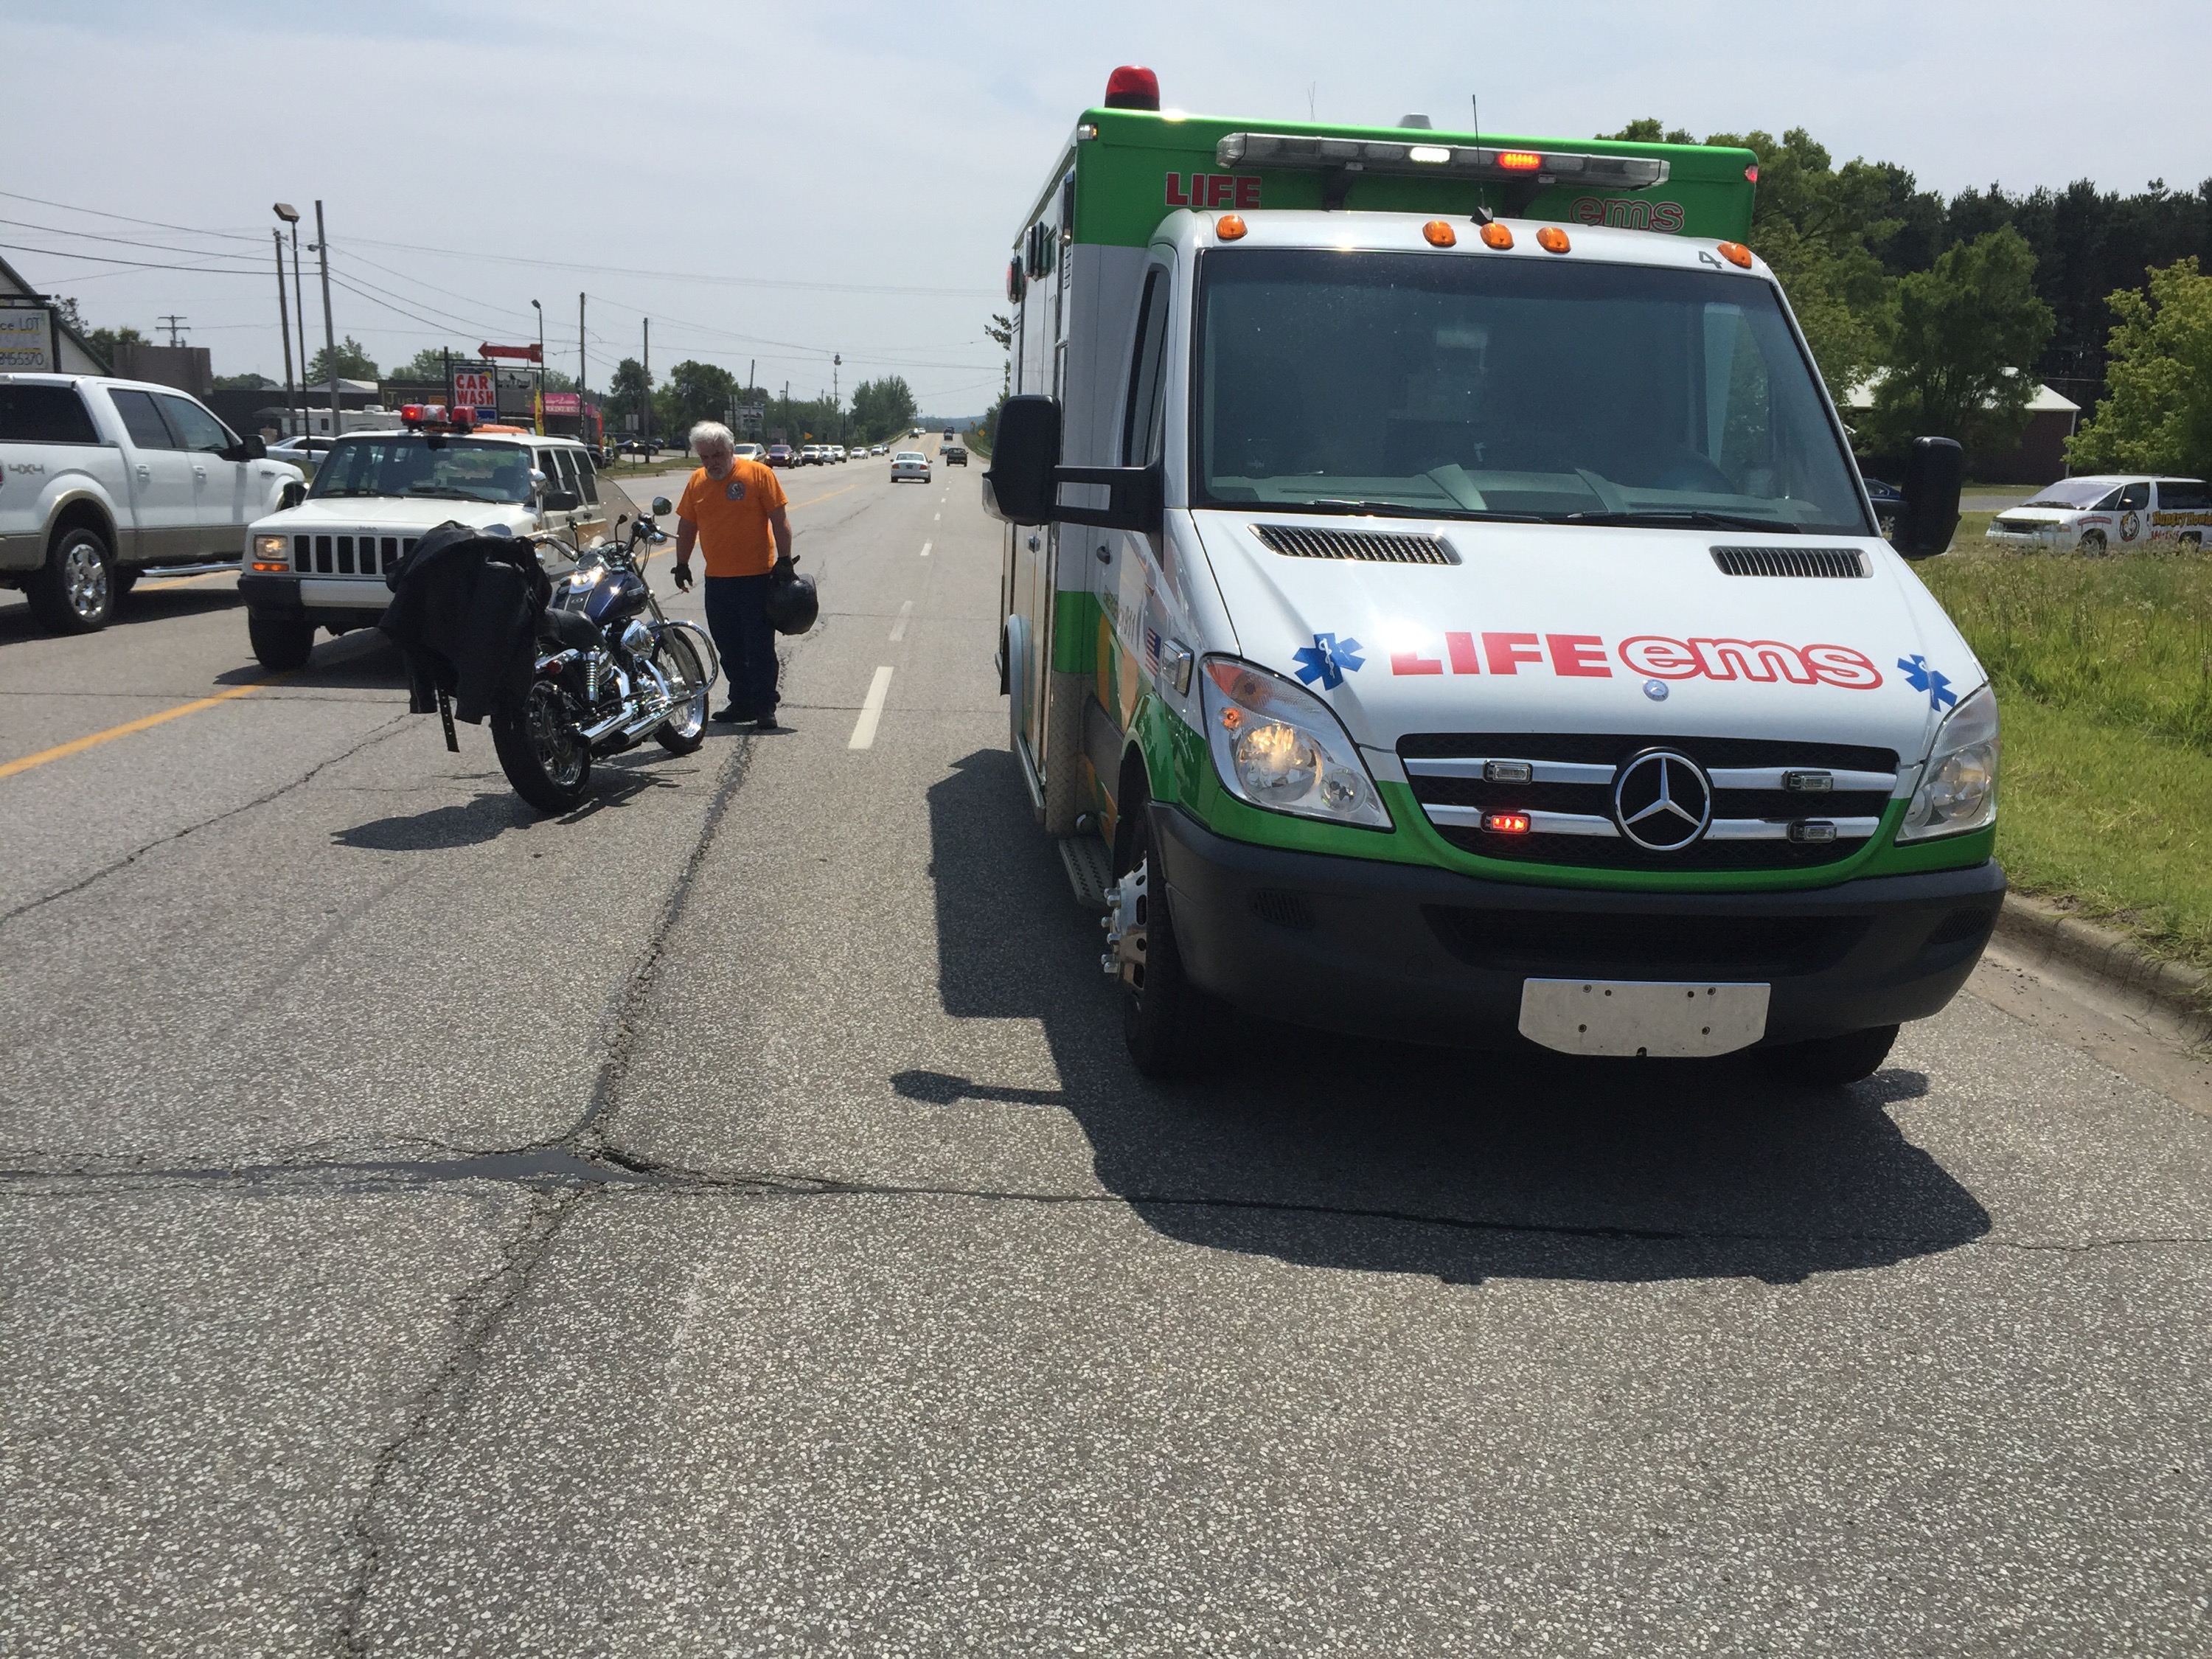 Another motorcycle crash 